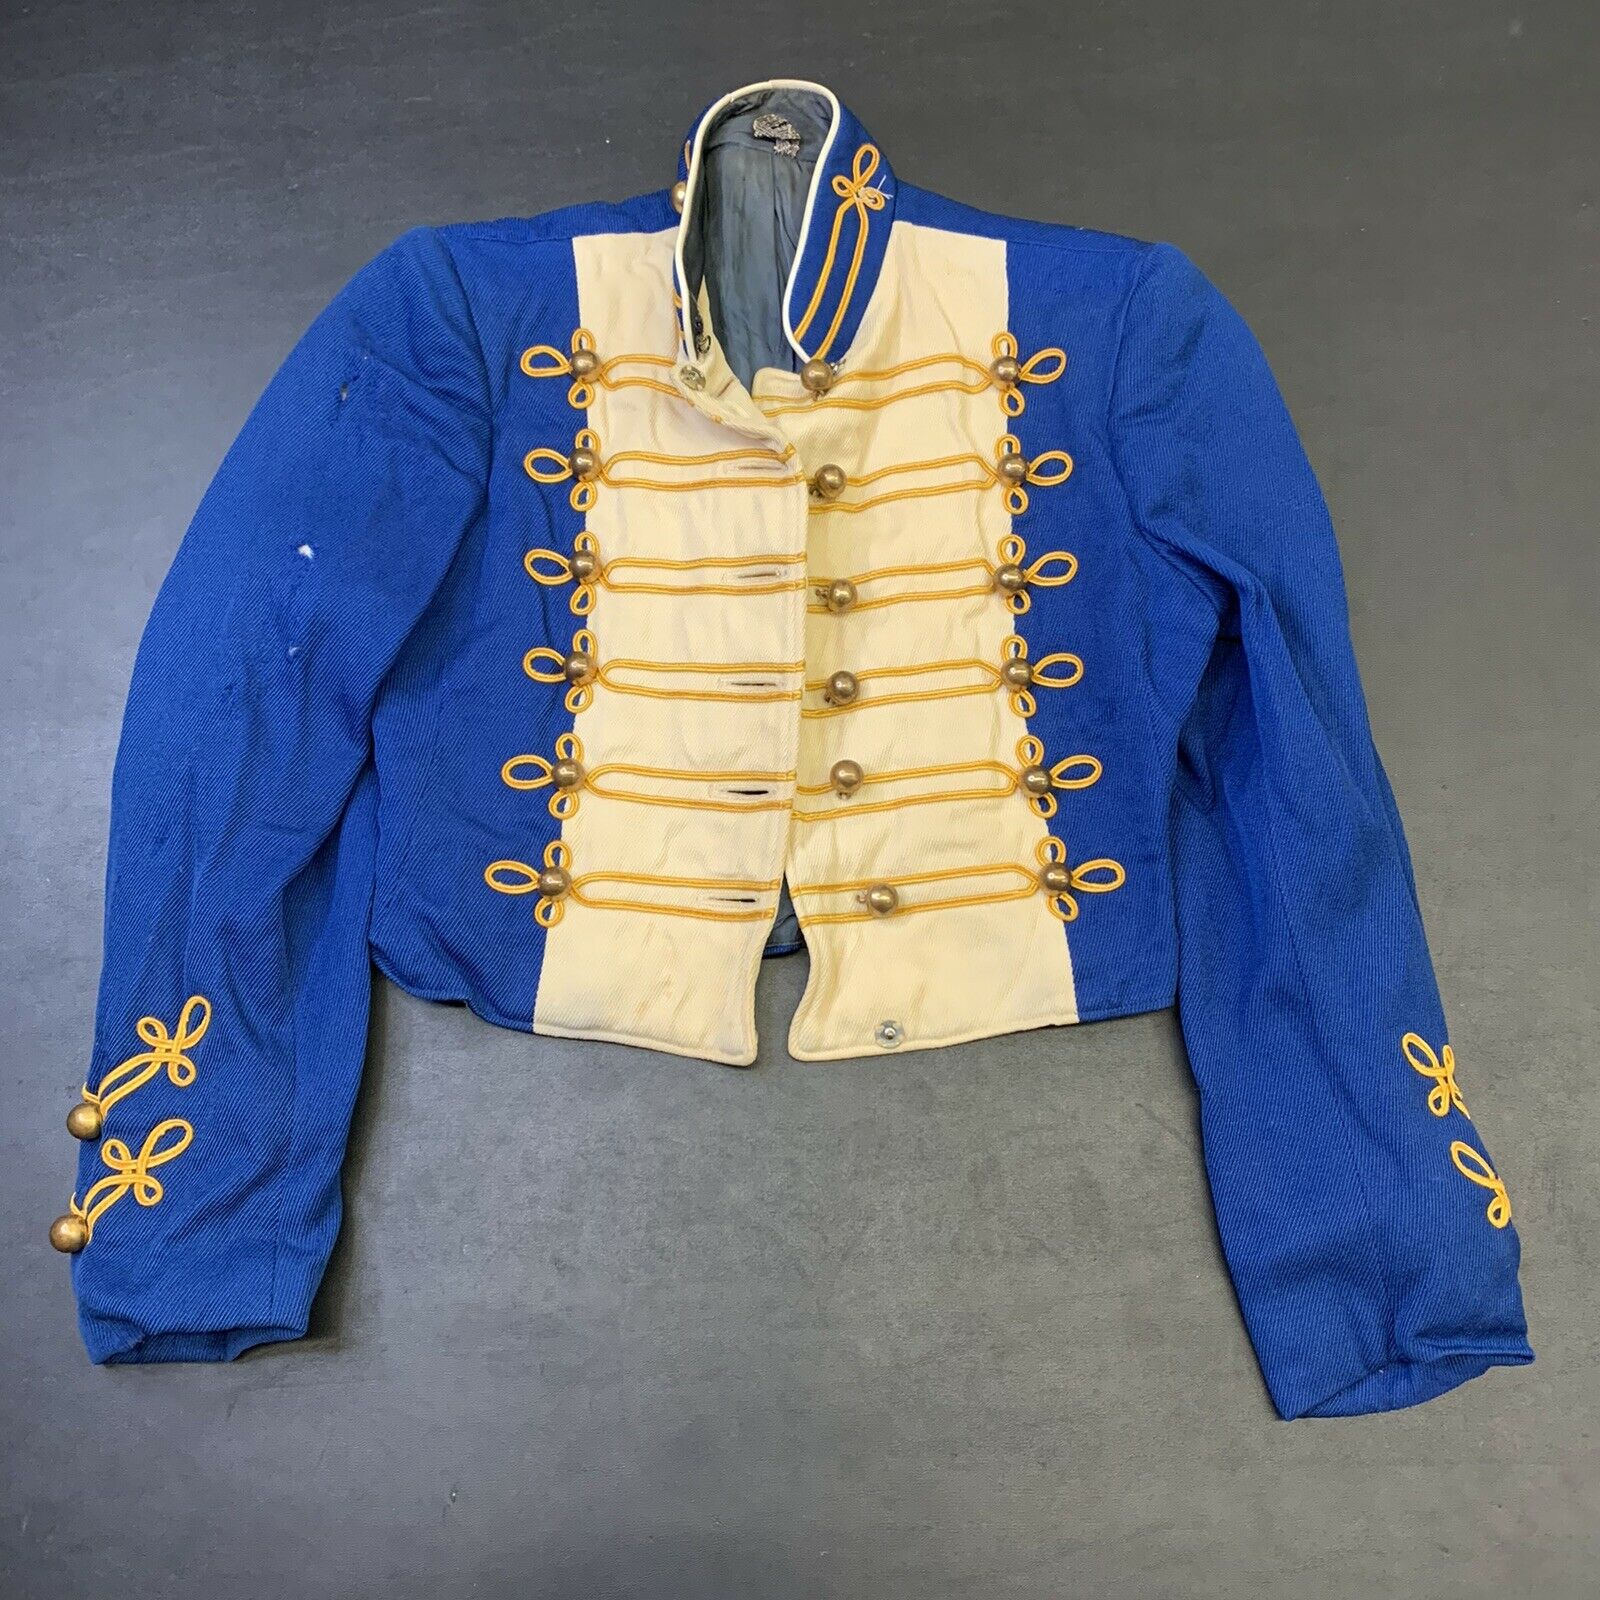 Vintage 50s 60s Marching Band Top Uniform Outfit Blue Yellow Menswear Music